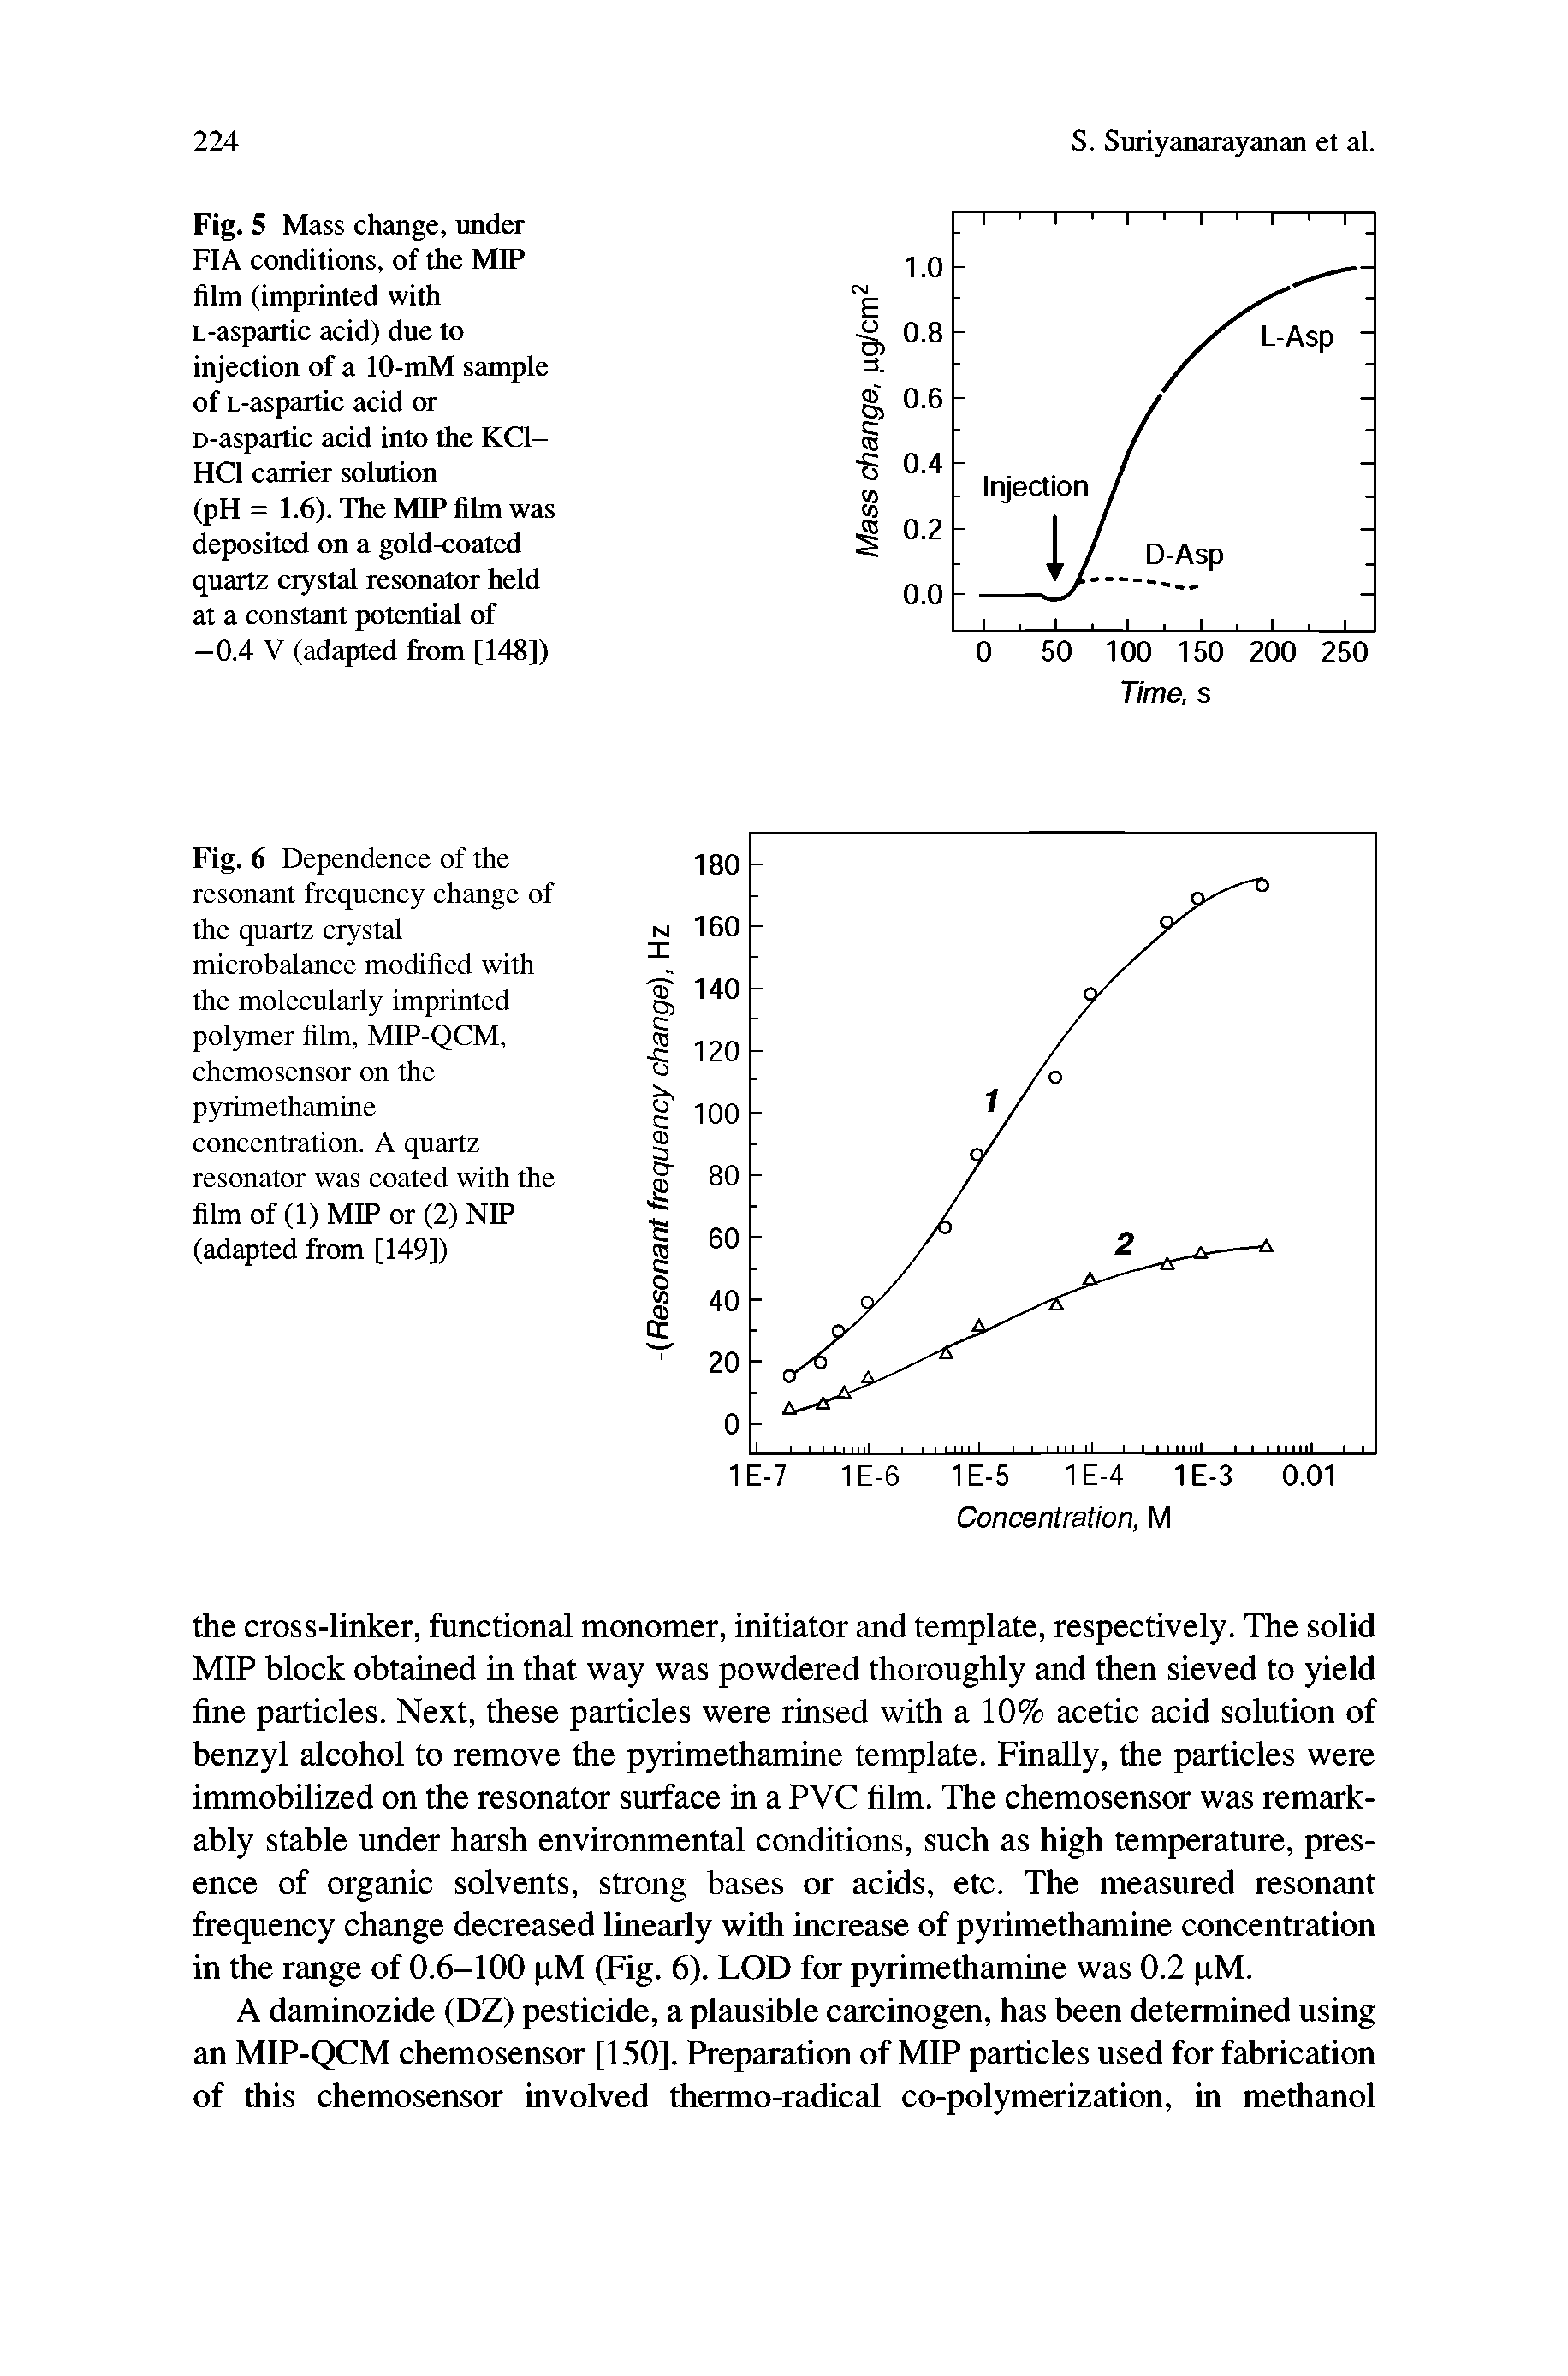 Fig. 5 Mass change, under FIA conditions, of the MIP film (imprinted with L-aspartic acid) due to injection of a 10-mM sample of L-aspartic acid or D-aspartic acid into the KC1-HC1 carrier solution (pH = 1.6). The MIP film was deposited on a gold-coated quartz crystal resonator held at a constant potential of —0.4 V (adapted from [148])...